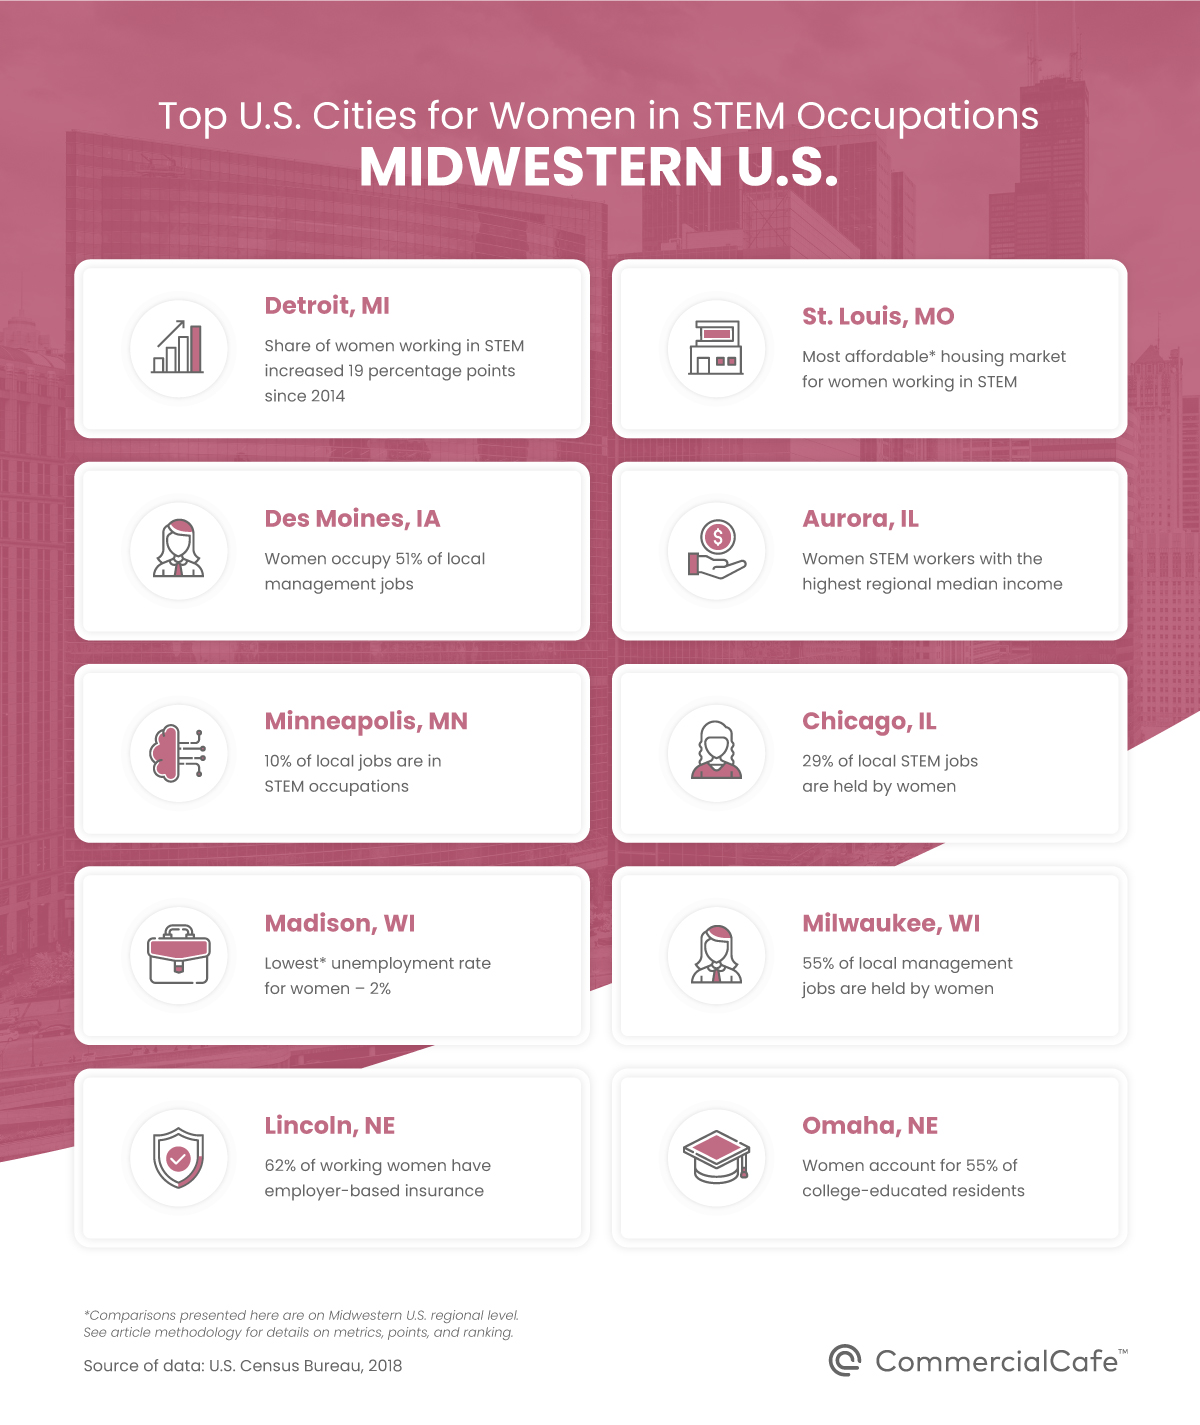 top u.s. cities for women working in stem midwest